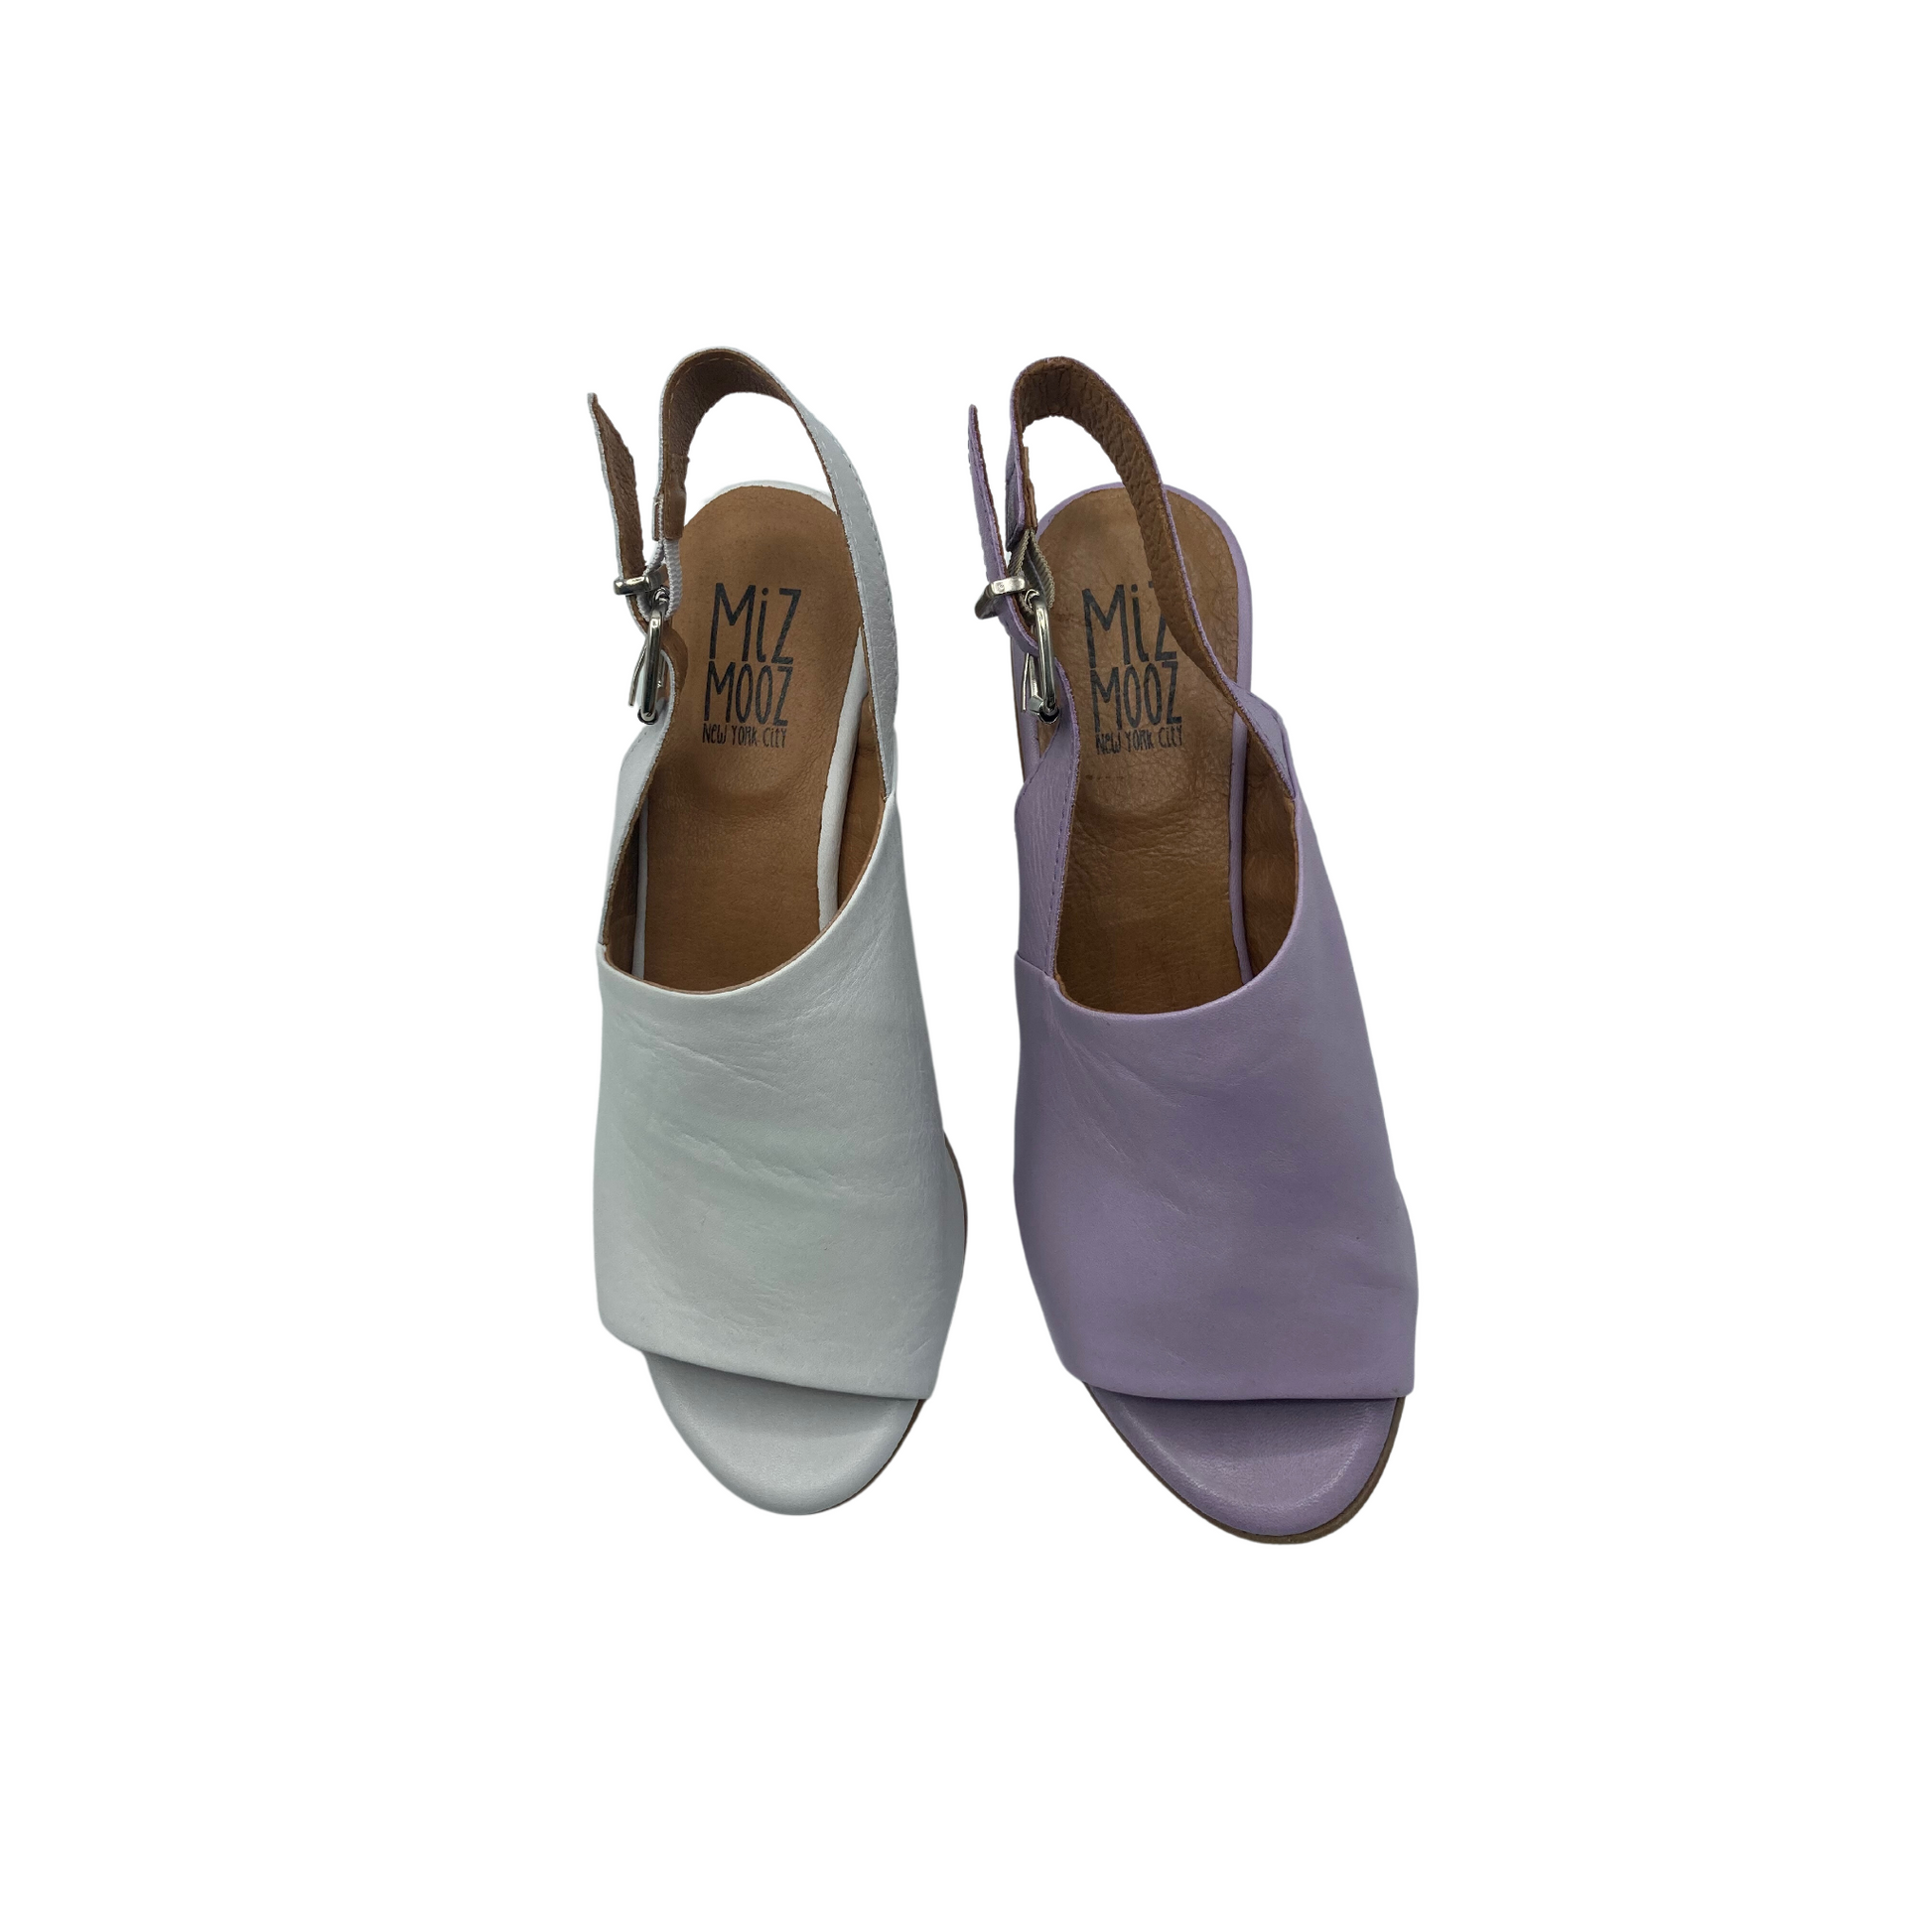 Top down view of a leather sandal in 2 colors - lavender and cloud